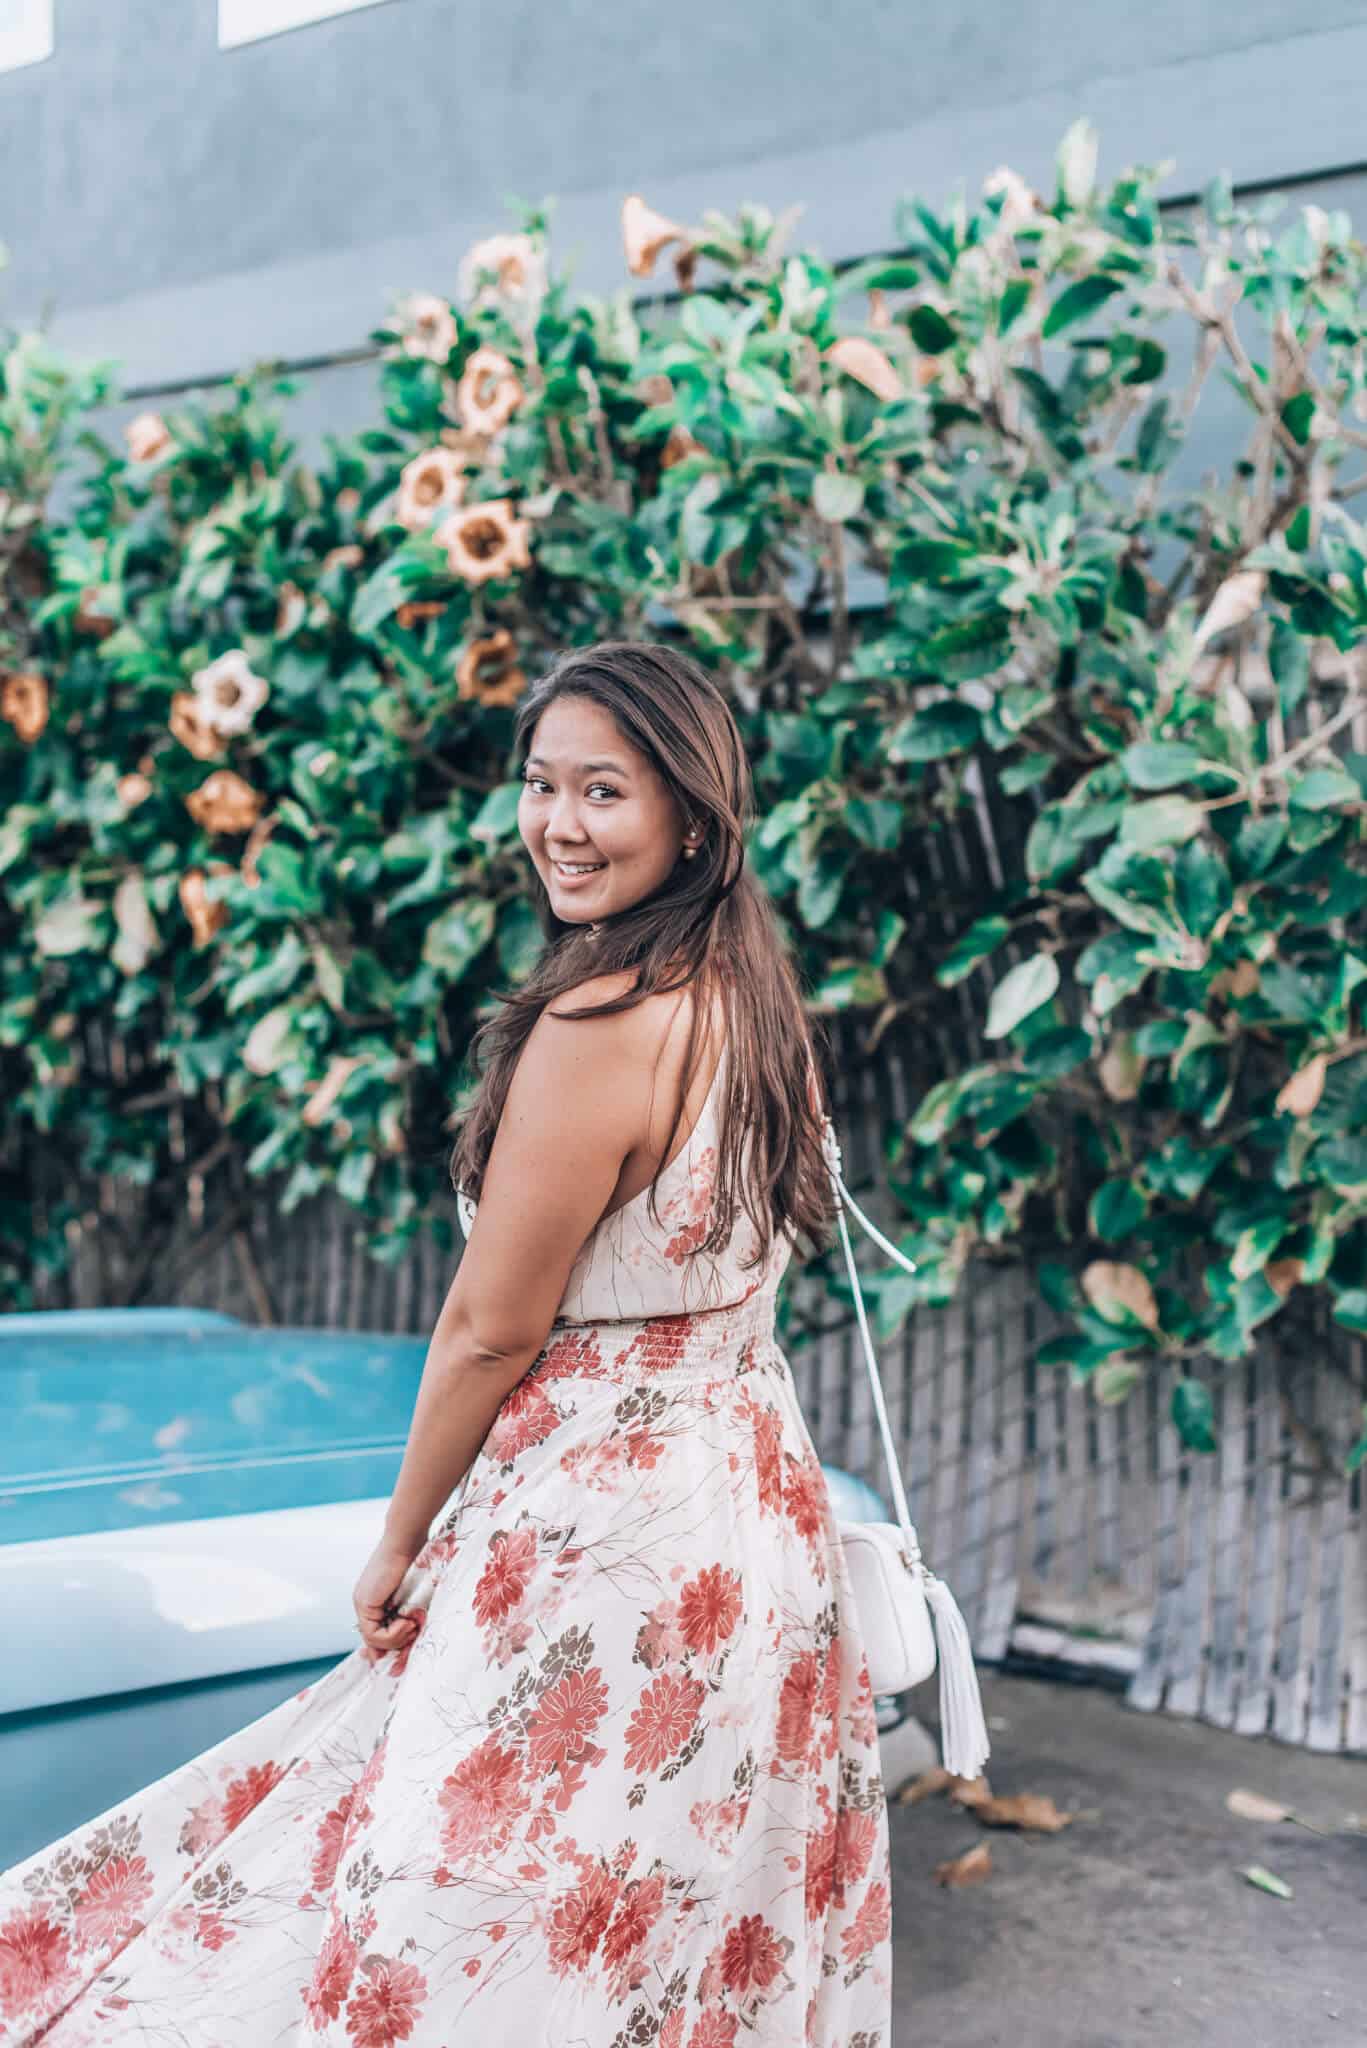 Vici: Floral Maxi Dress featured by popular San Francisco fashion blogger WTFab